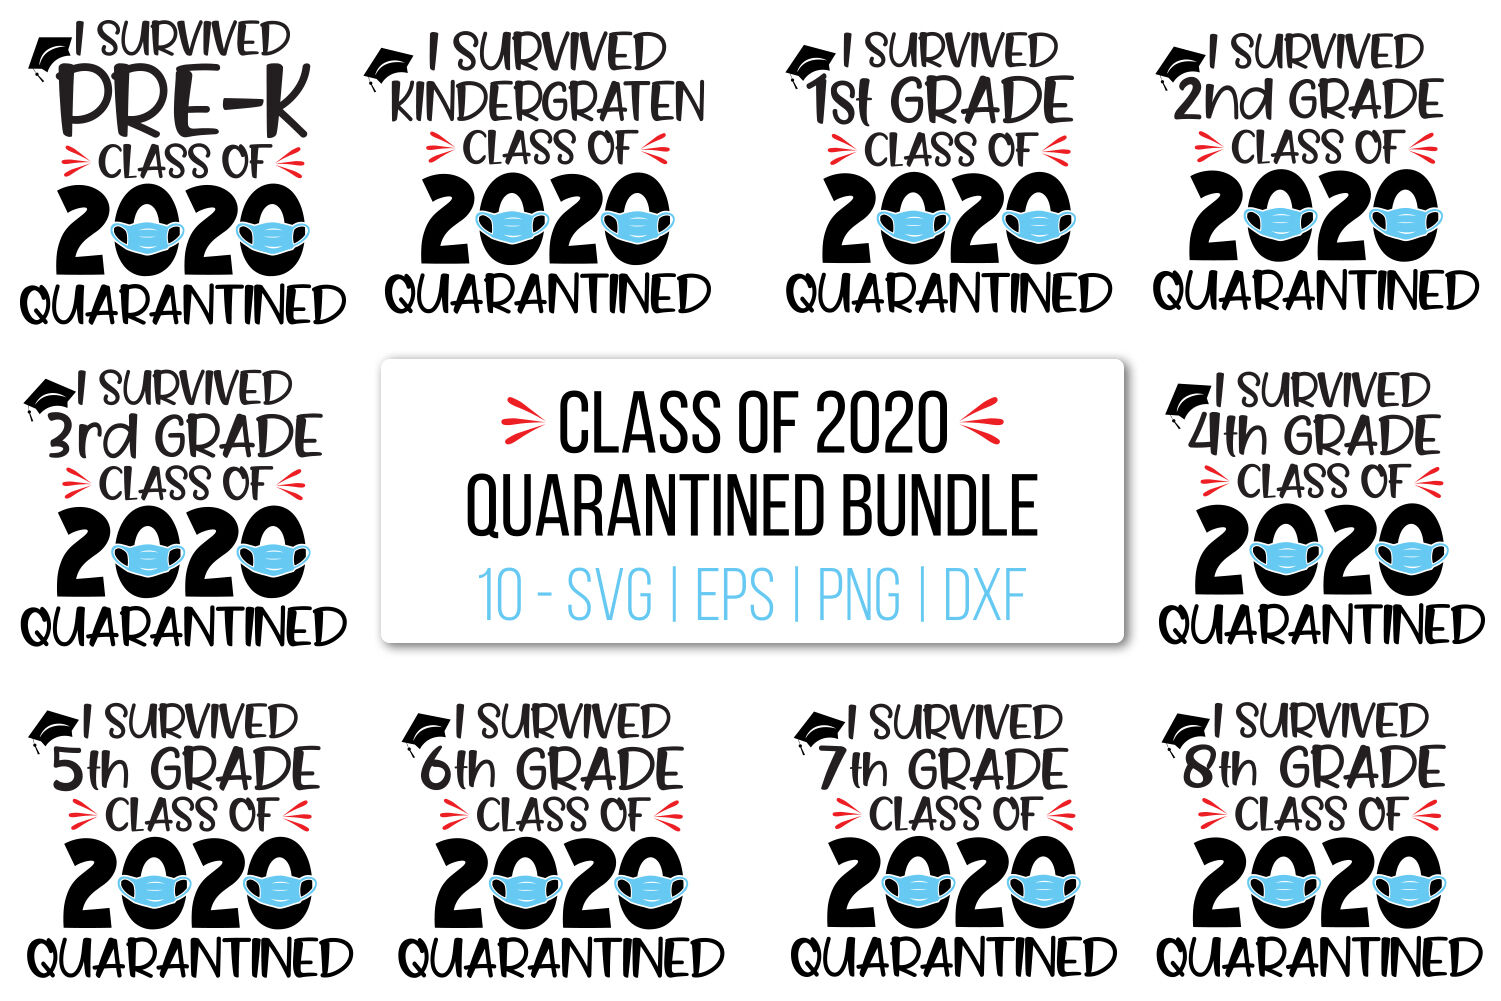 Class Of 2020 Quarantined Bundle Svg By All About Svg Thehungryjpeg Com